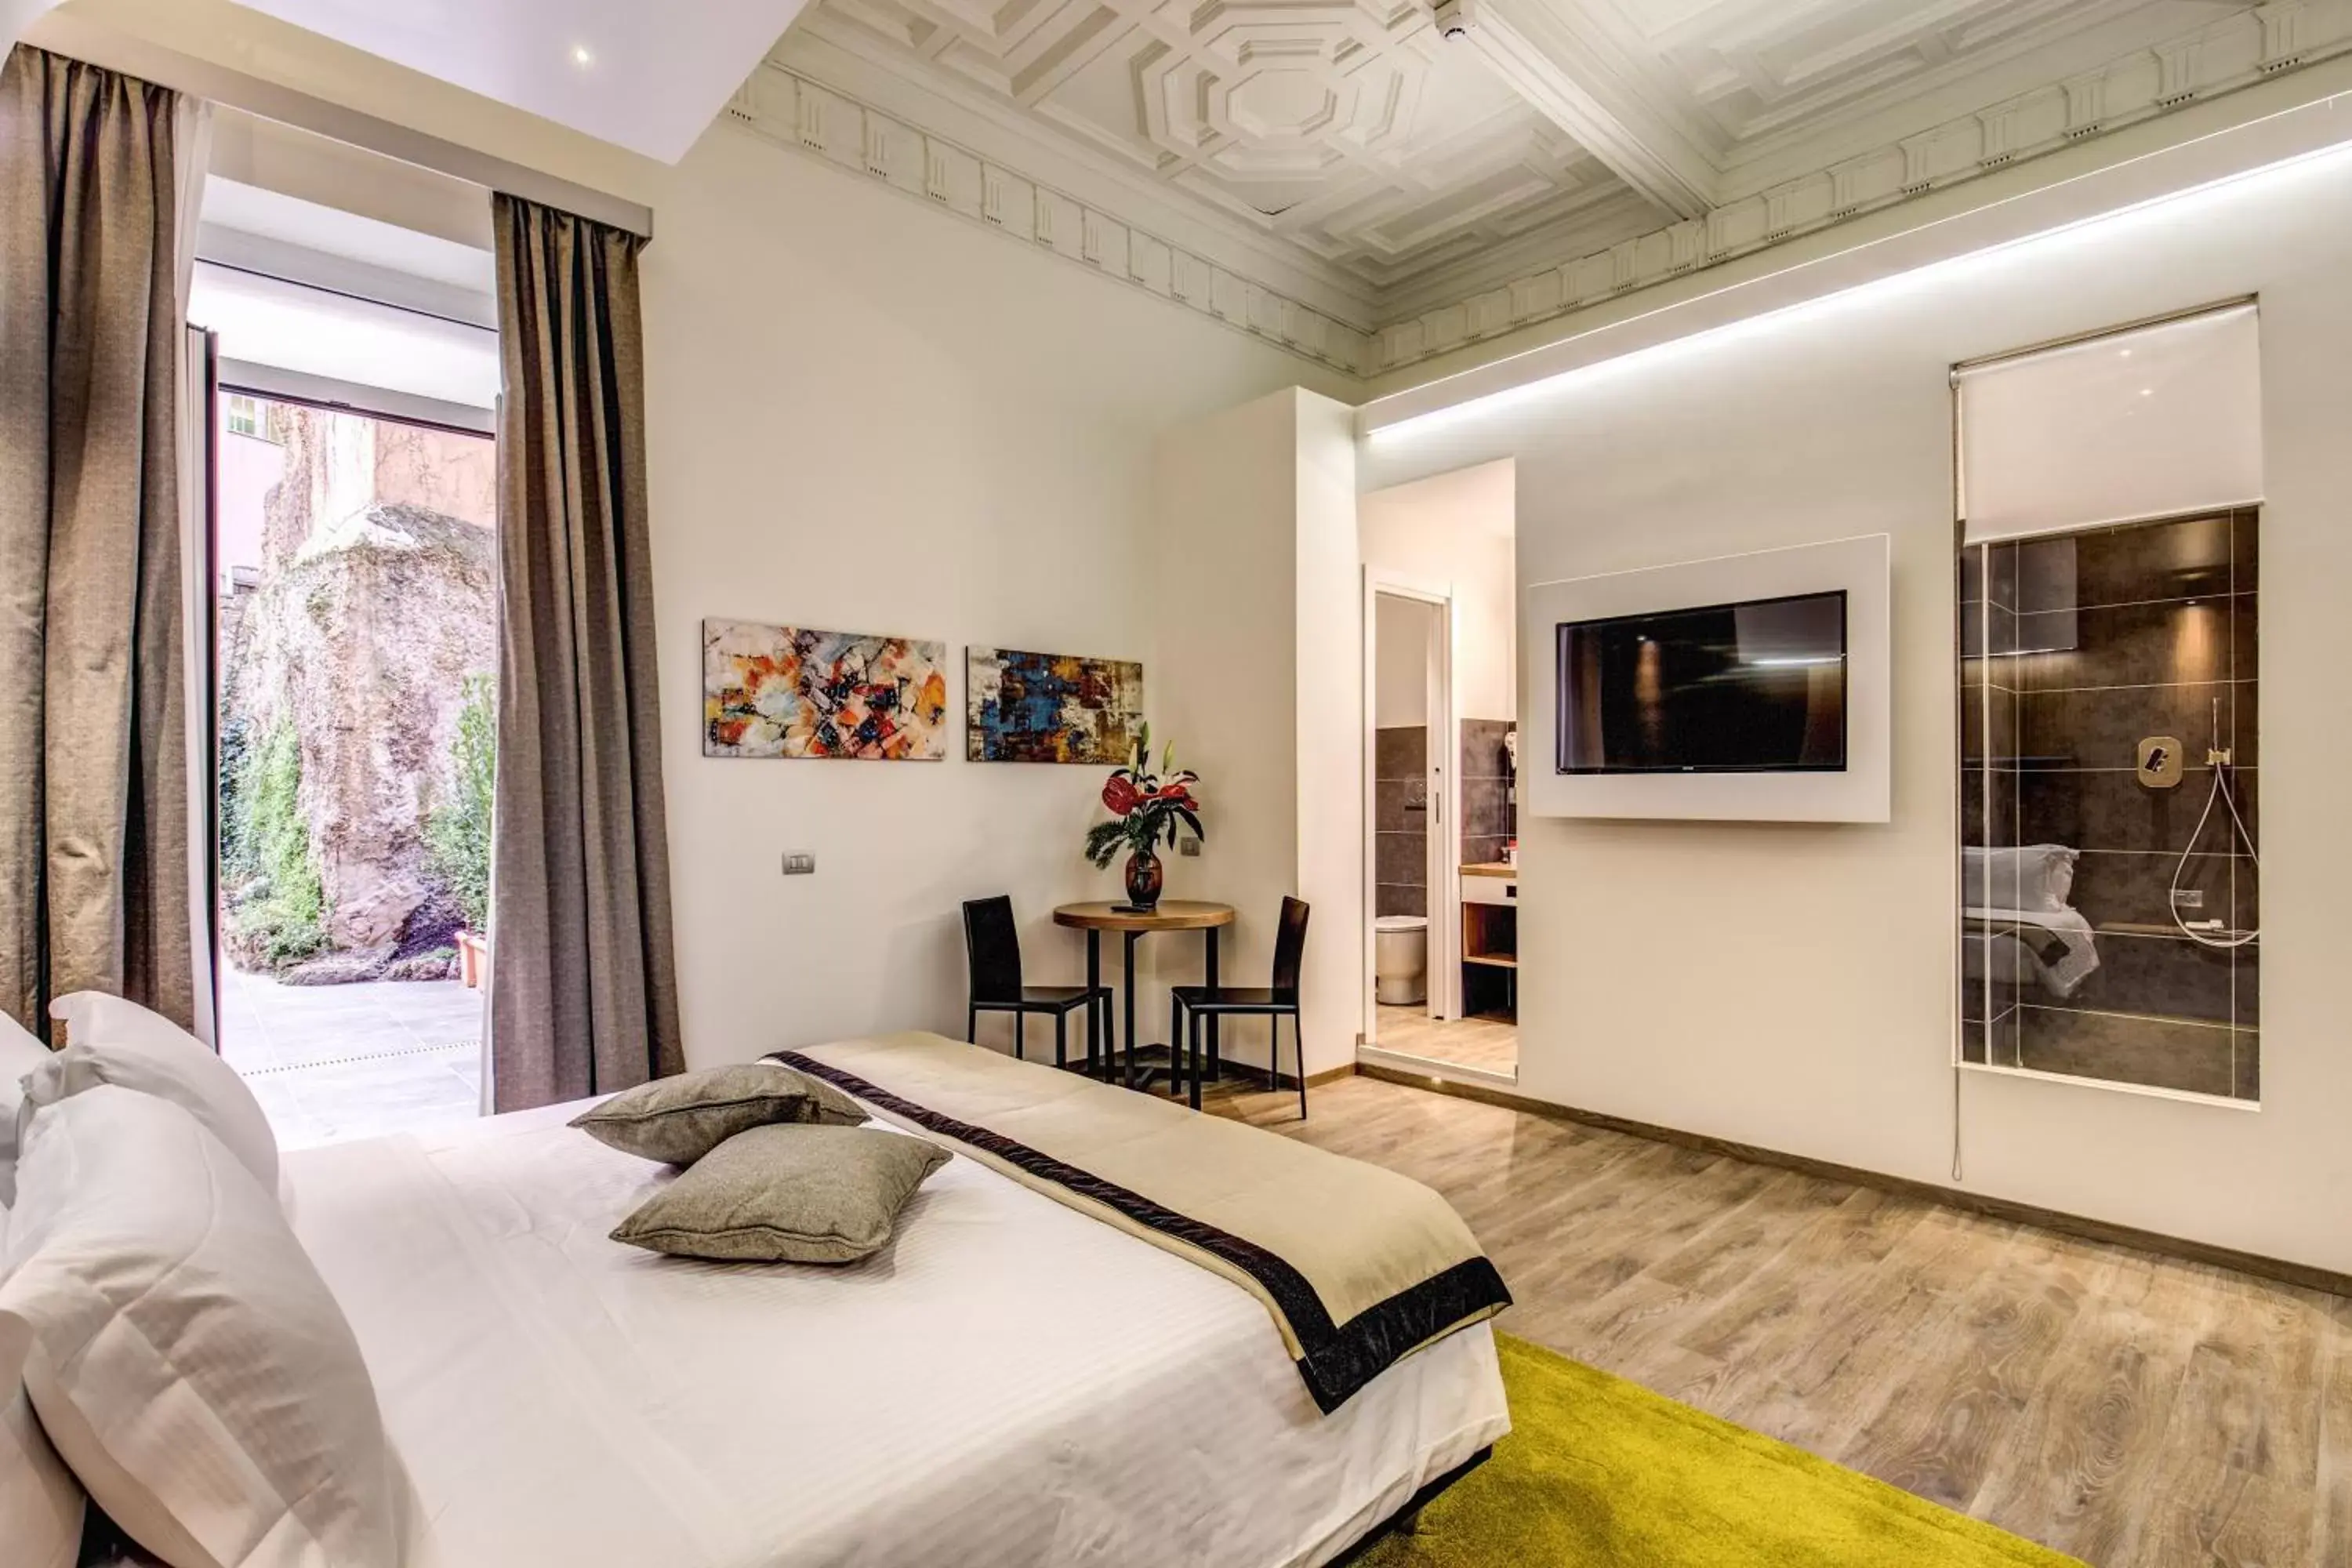 Photo of the whole room in Trevi Collection Hotel - Gruppo Trevi Hotels